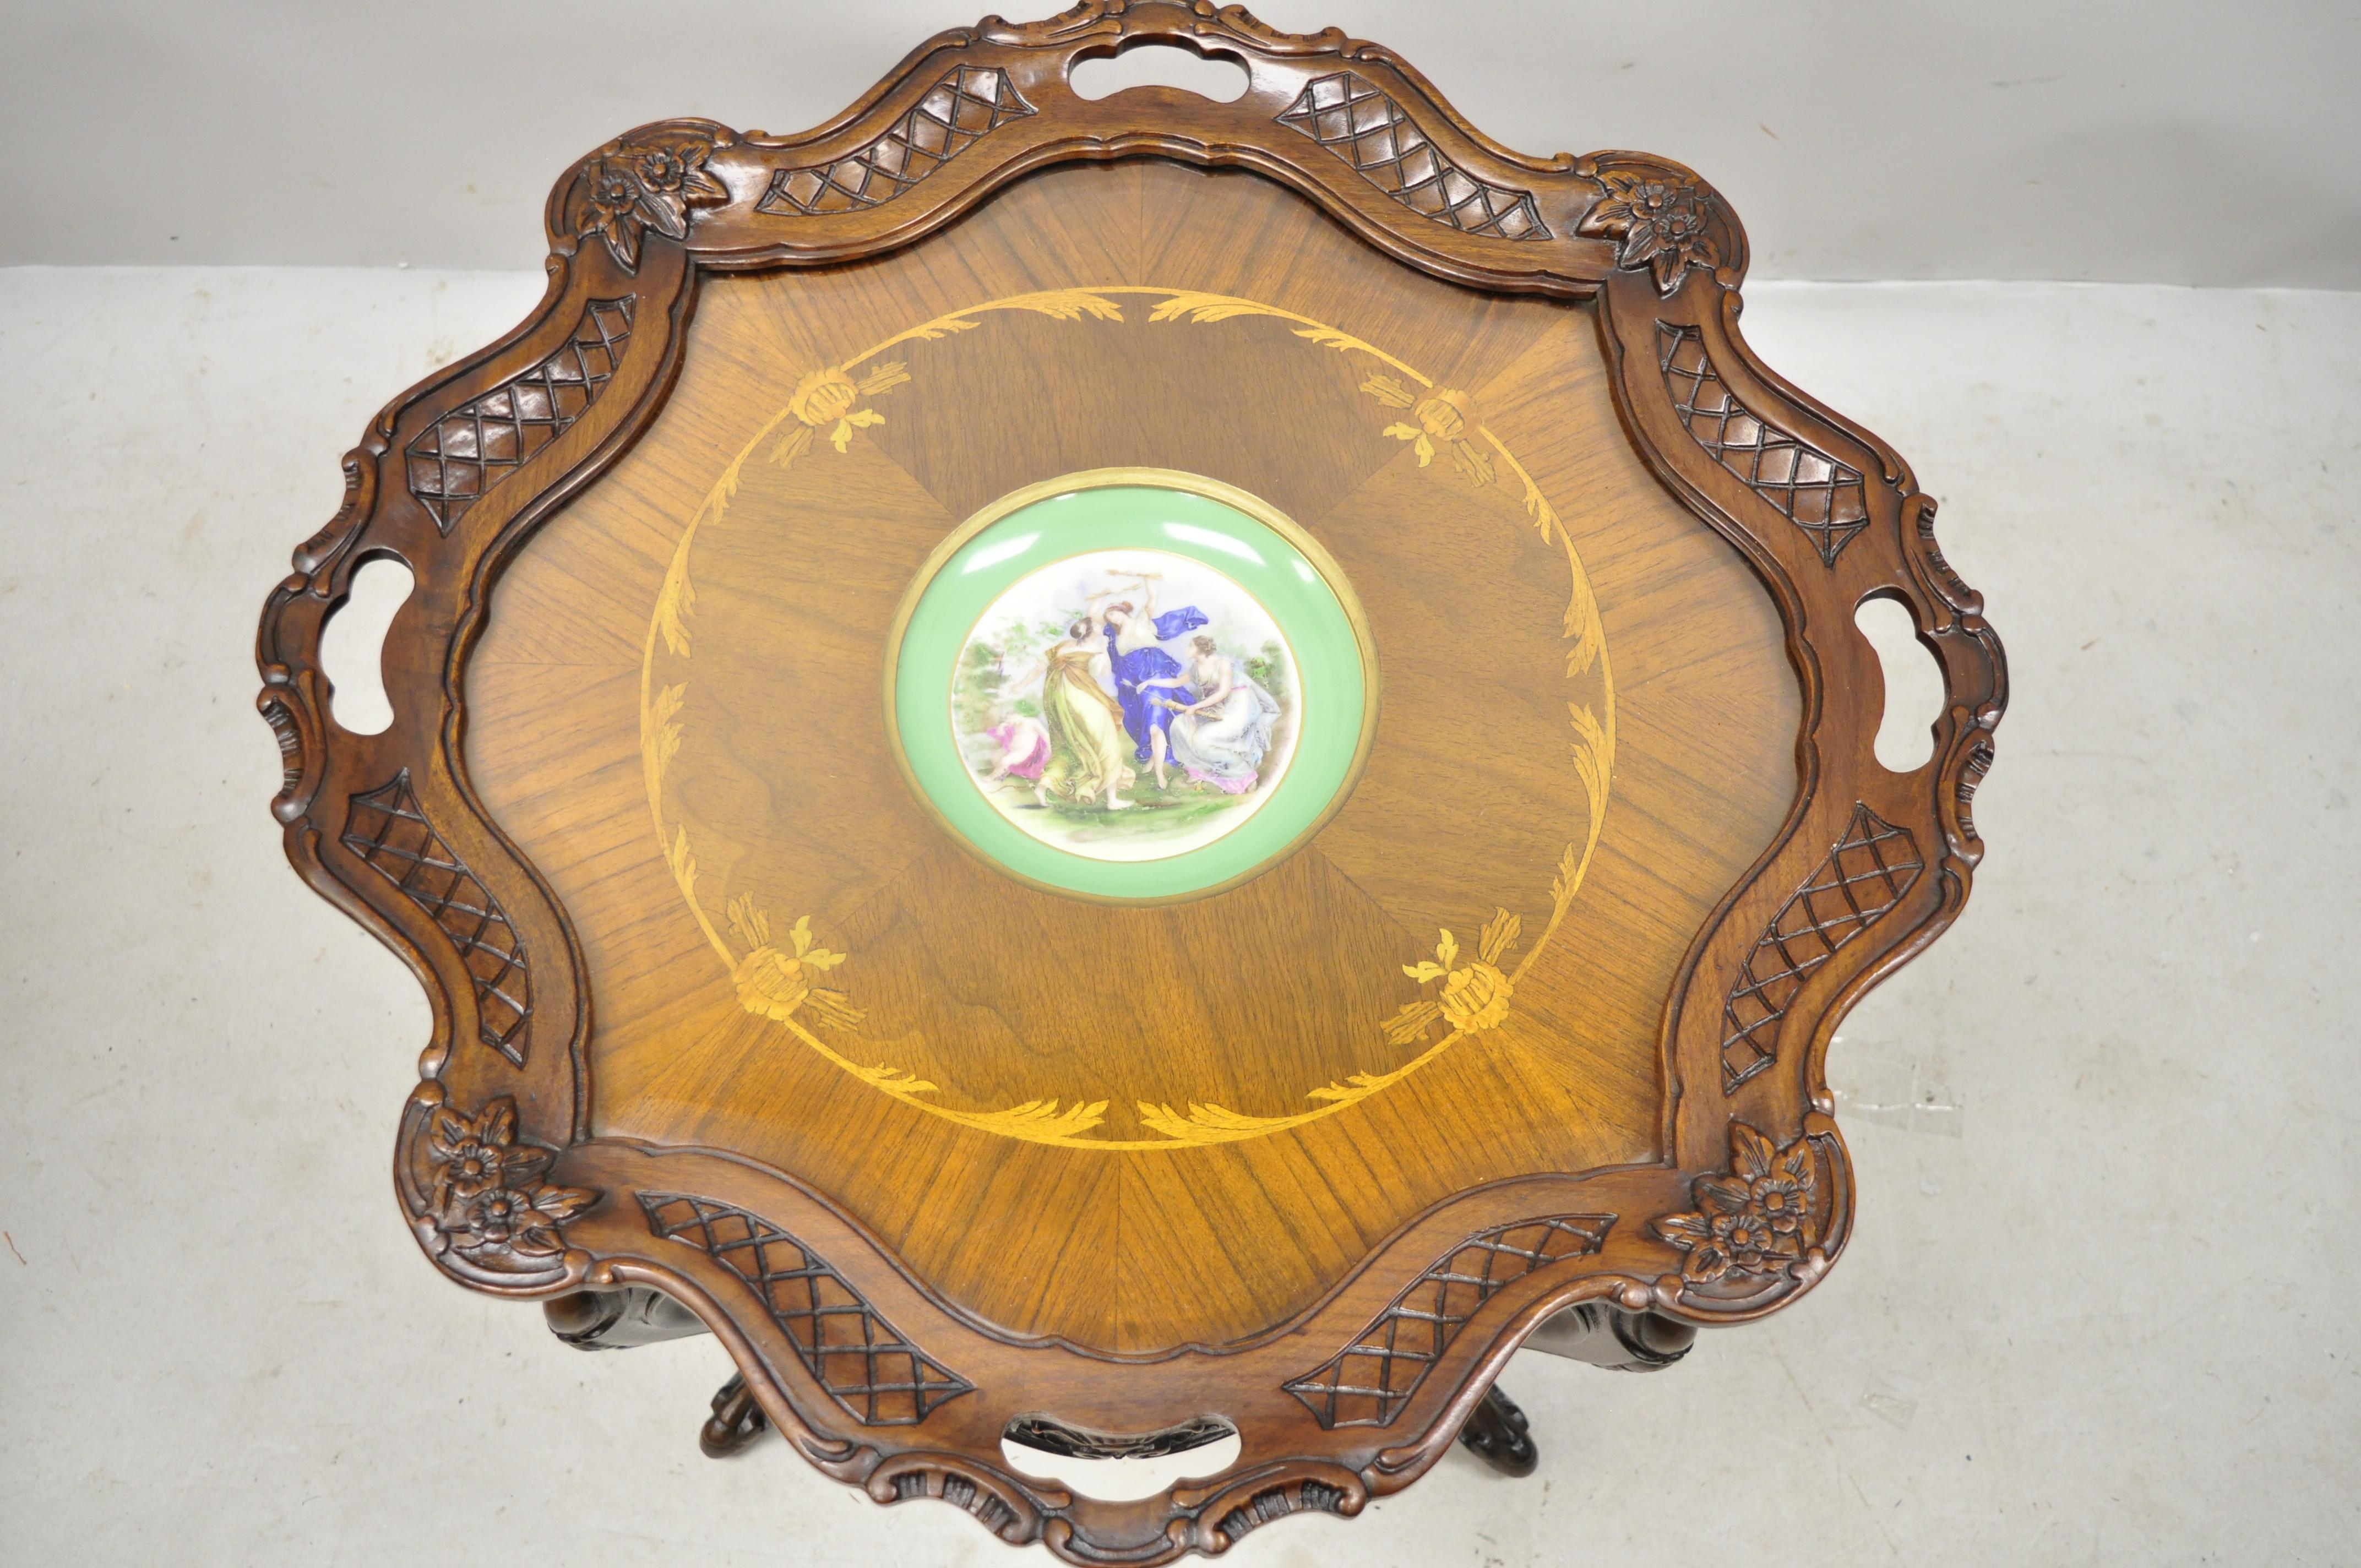 Antique French Louis XV style satinwood inlay serving tray top coffee side table with French green porcelain dish center signed by Angelica Kauffman. Item features Artist-signed porcelain painted dish to center (circa 1890s) by Angelica Kauffman a